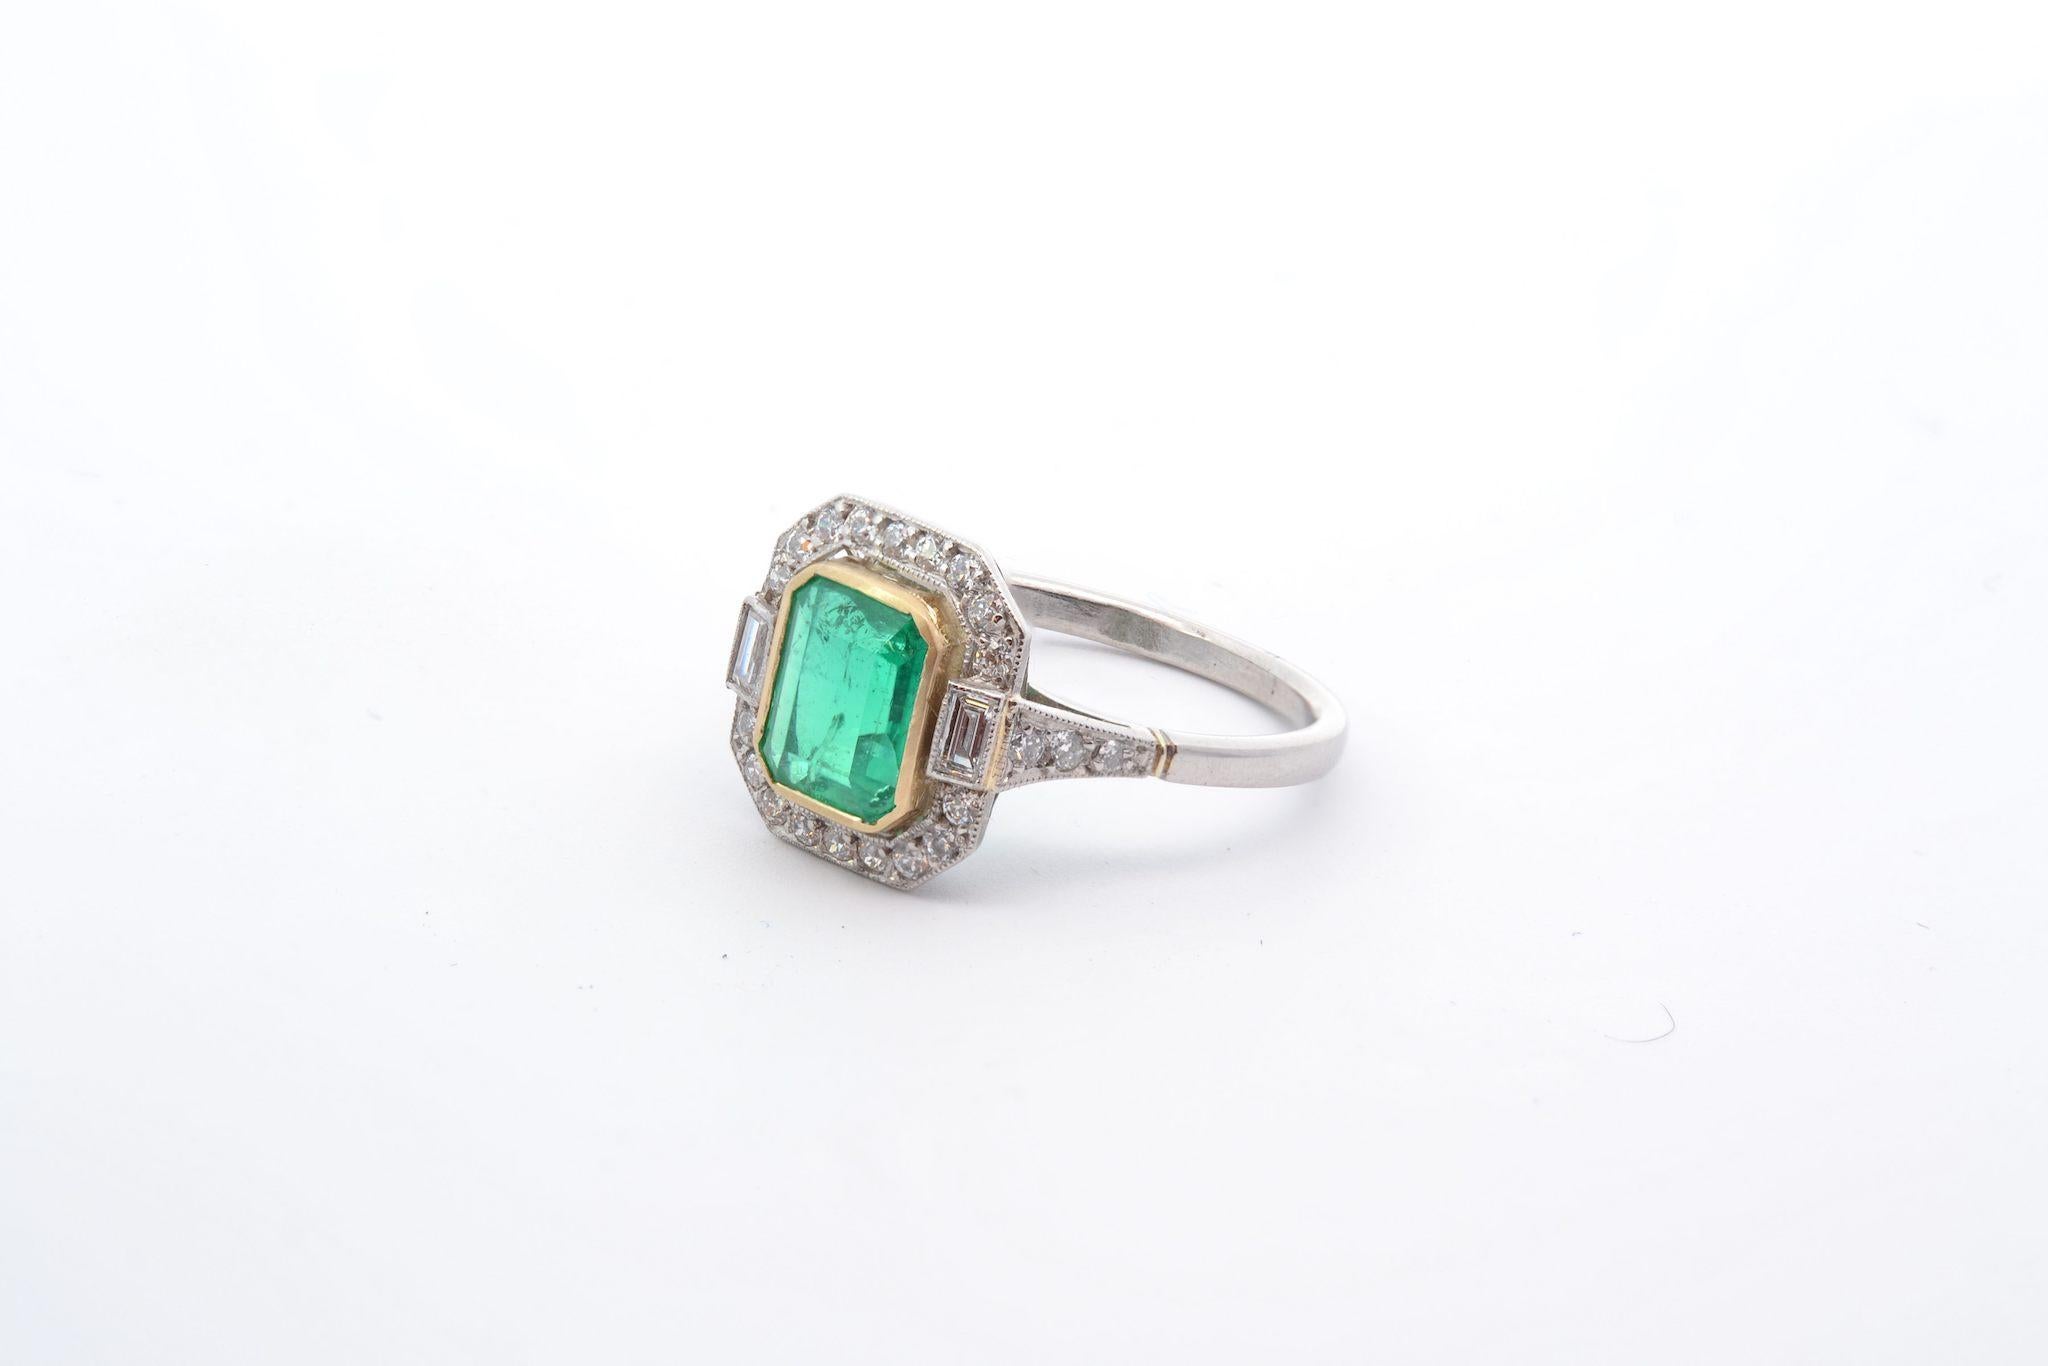 Emerald Cut 1.11 carats colombian emerald ring with diamonds For Sale